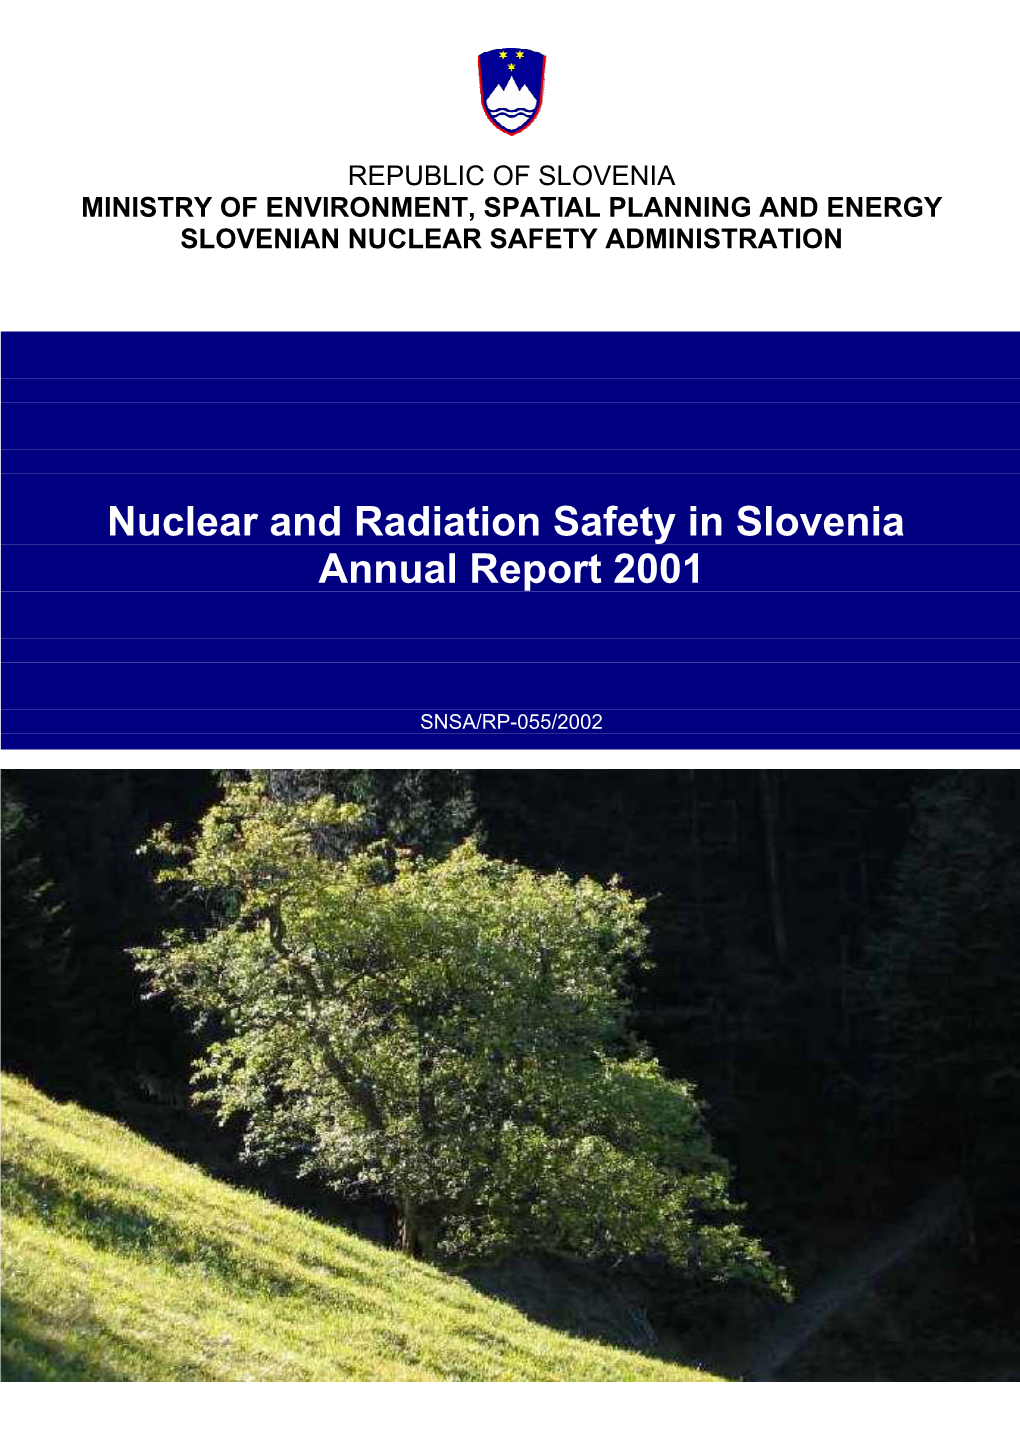 Nuclear and Radiation Safety in Slovenia. Annual Report 2001